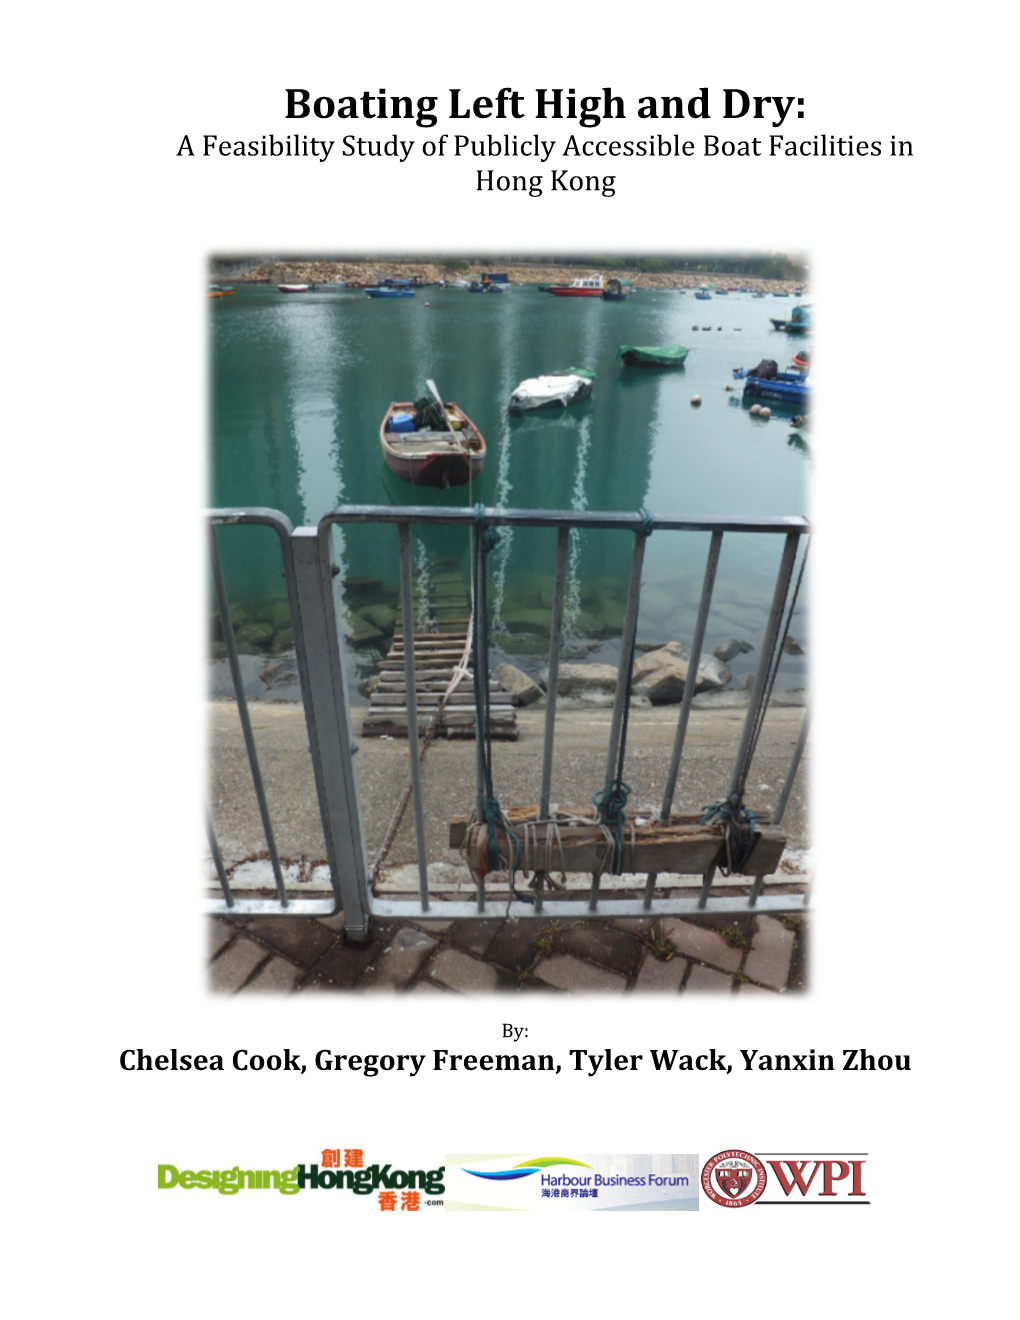 Boating Left High and Dry: a Feasibility Study of Publicly Accessible Boat Facilities in Hong Kong